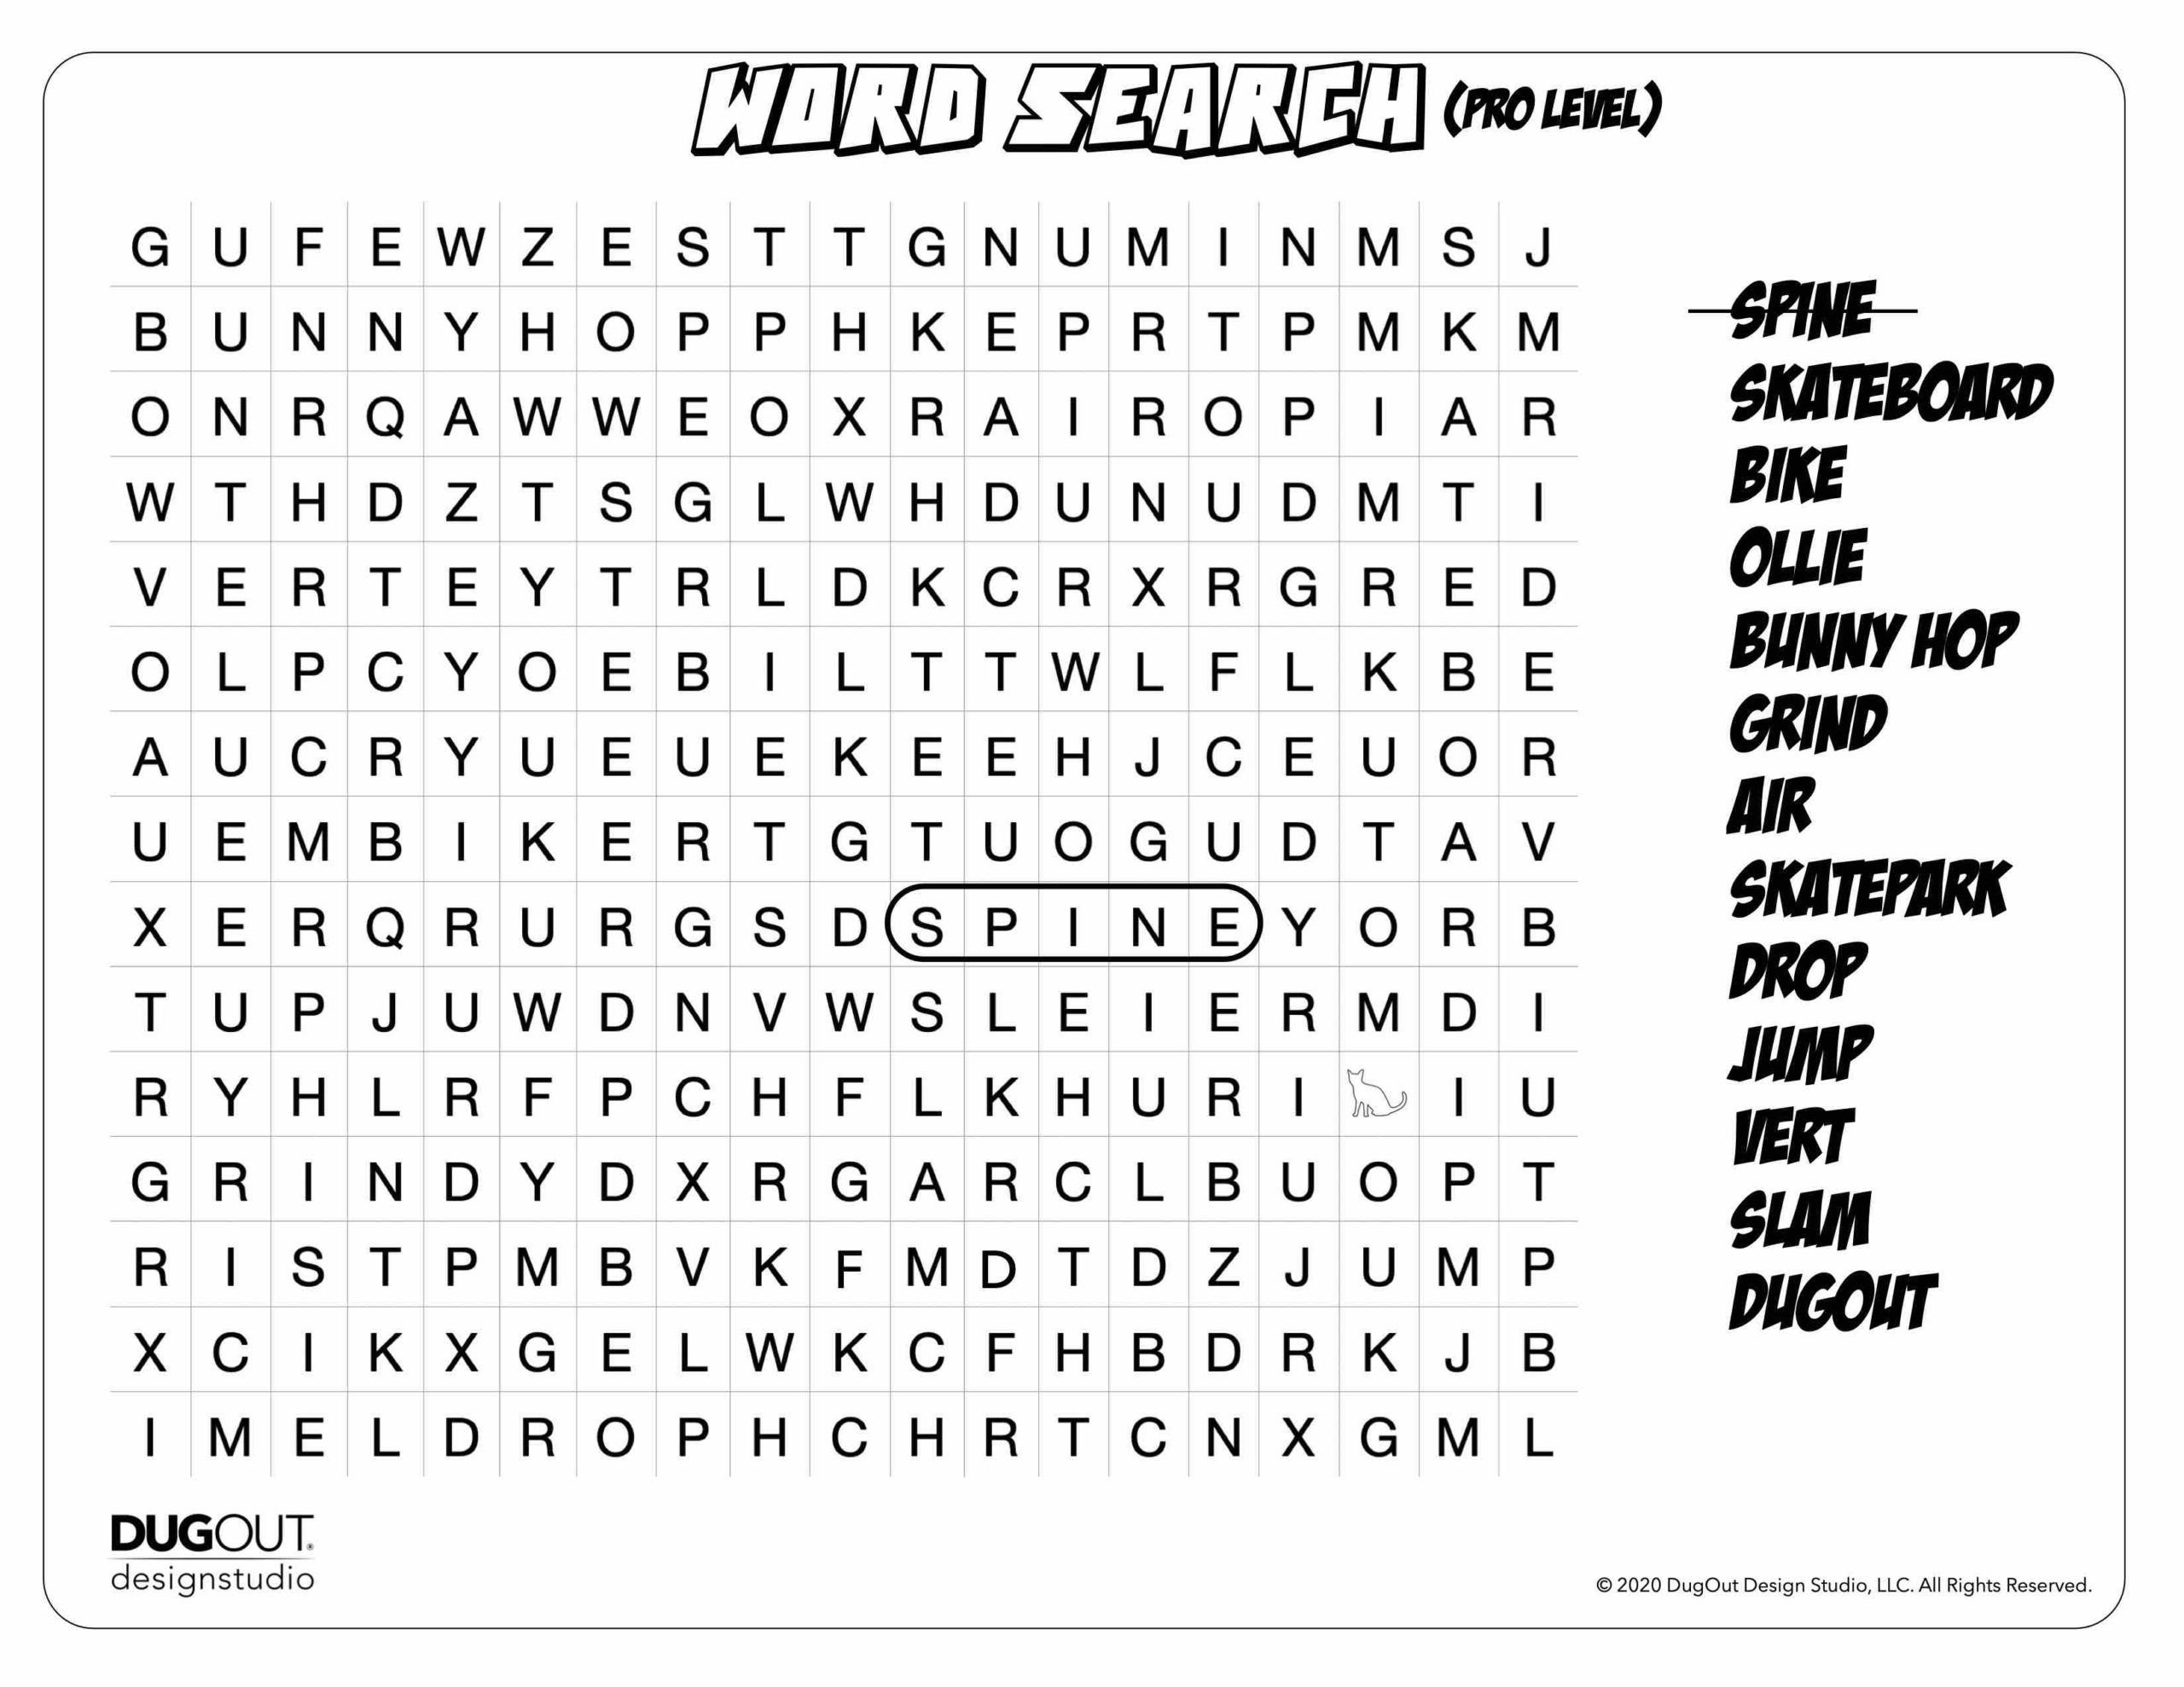 skatepark word search page advanced